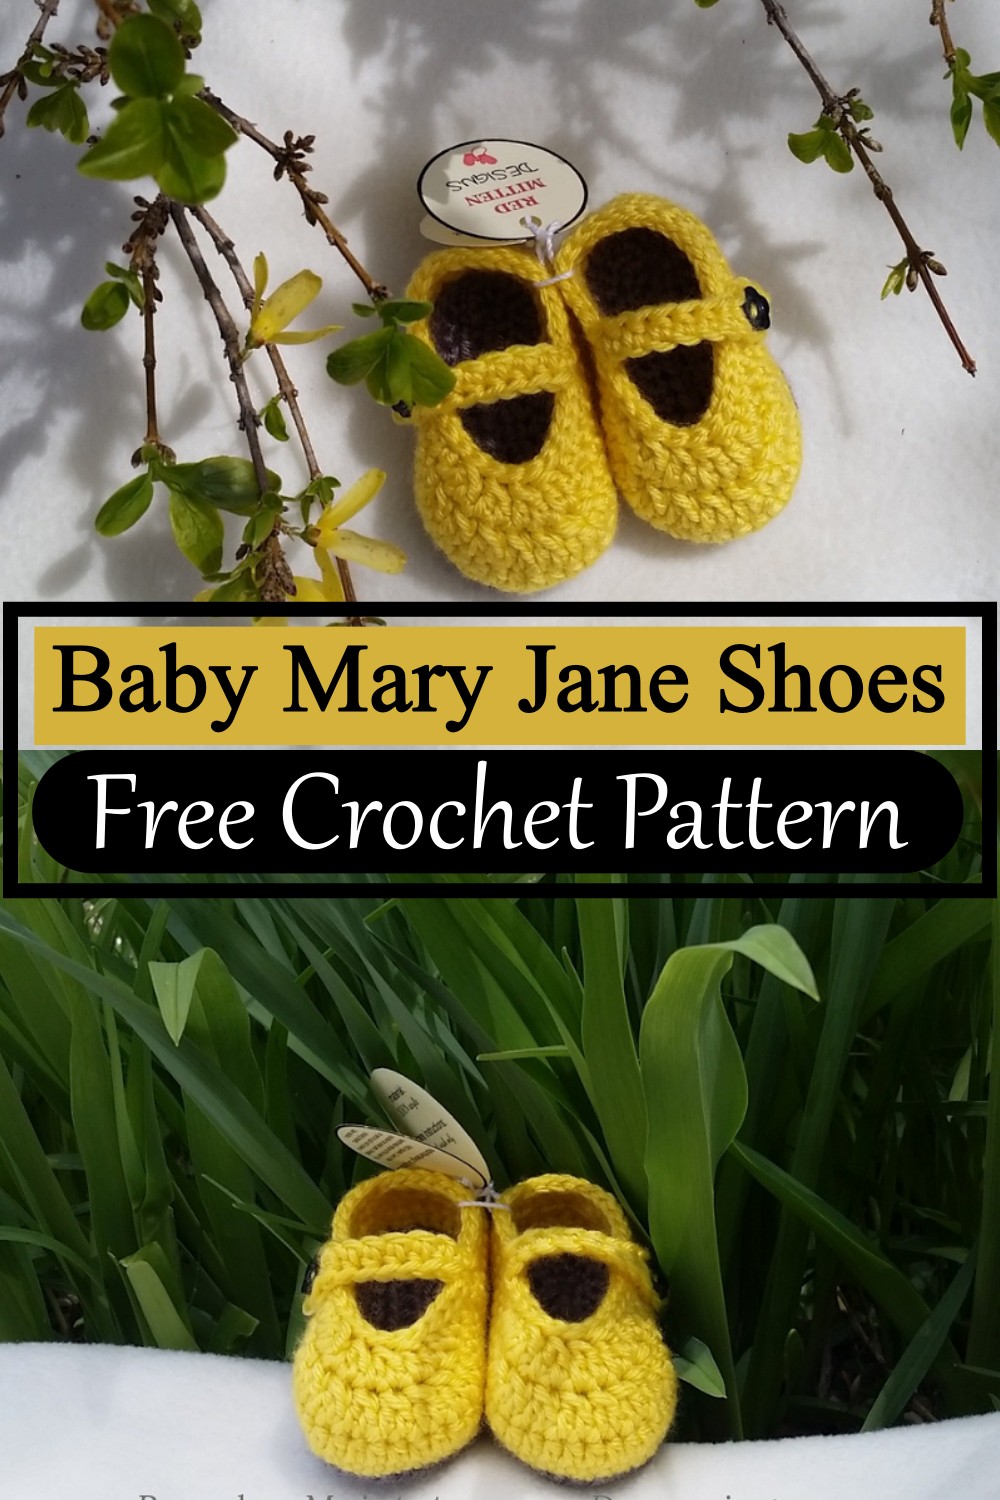 Baby Mary Jane Shoes